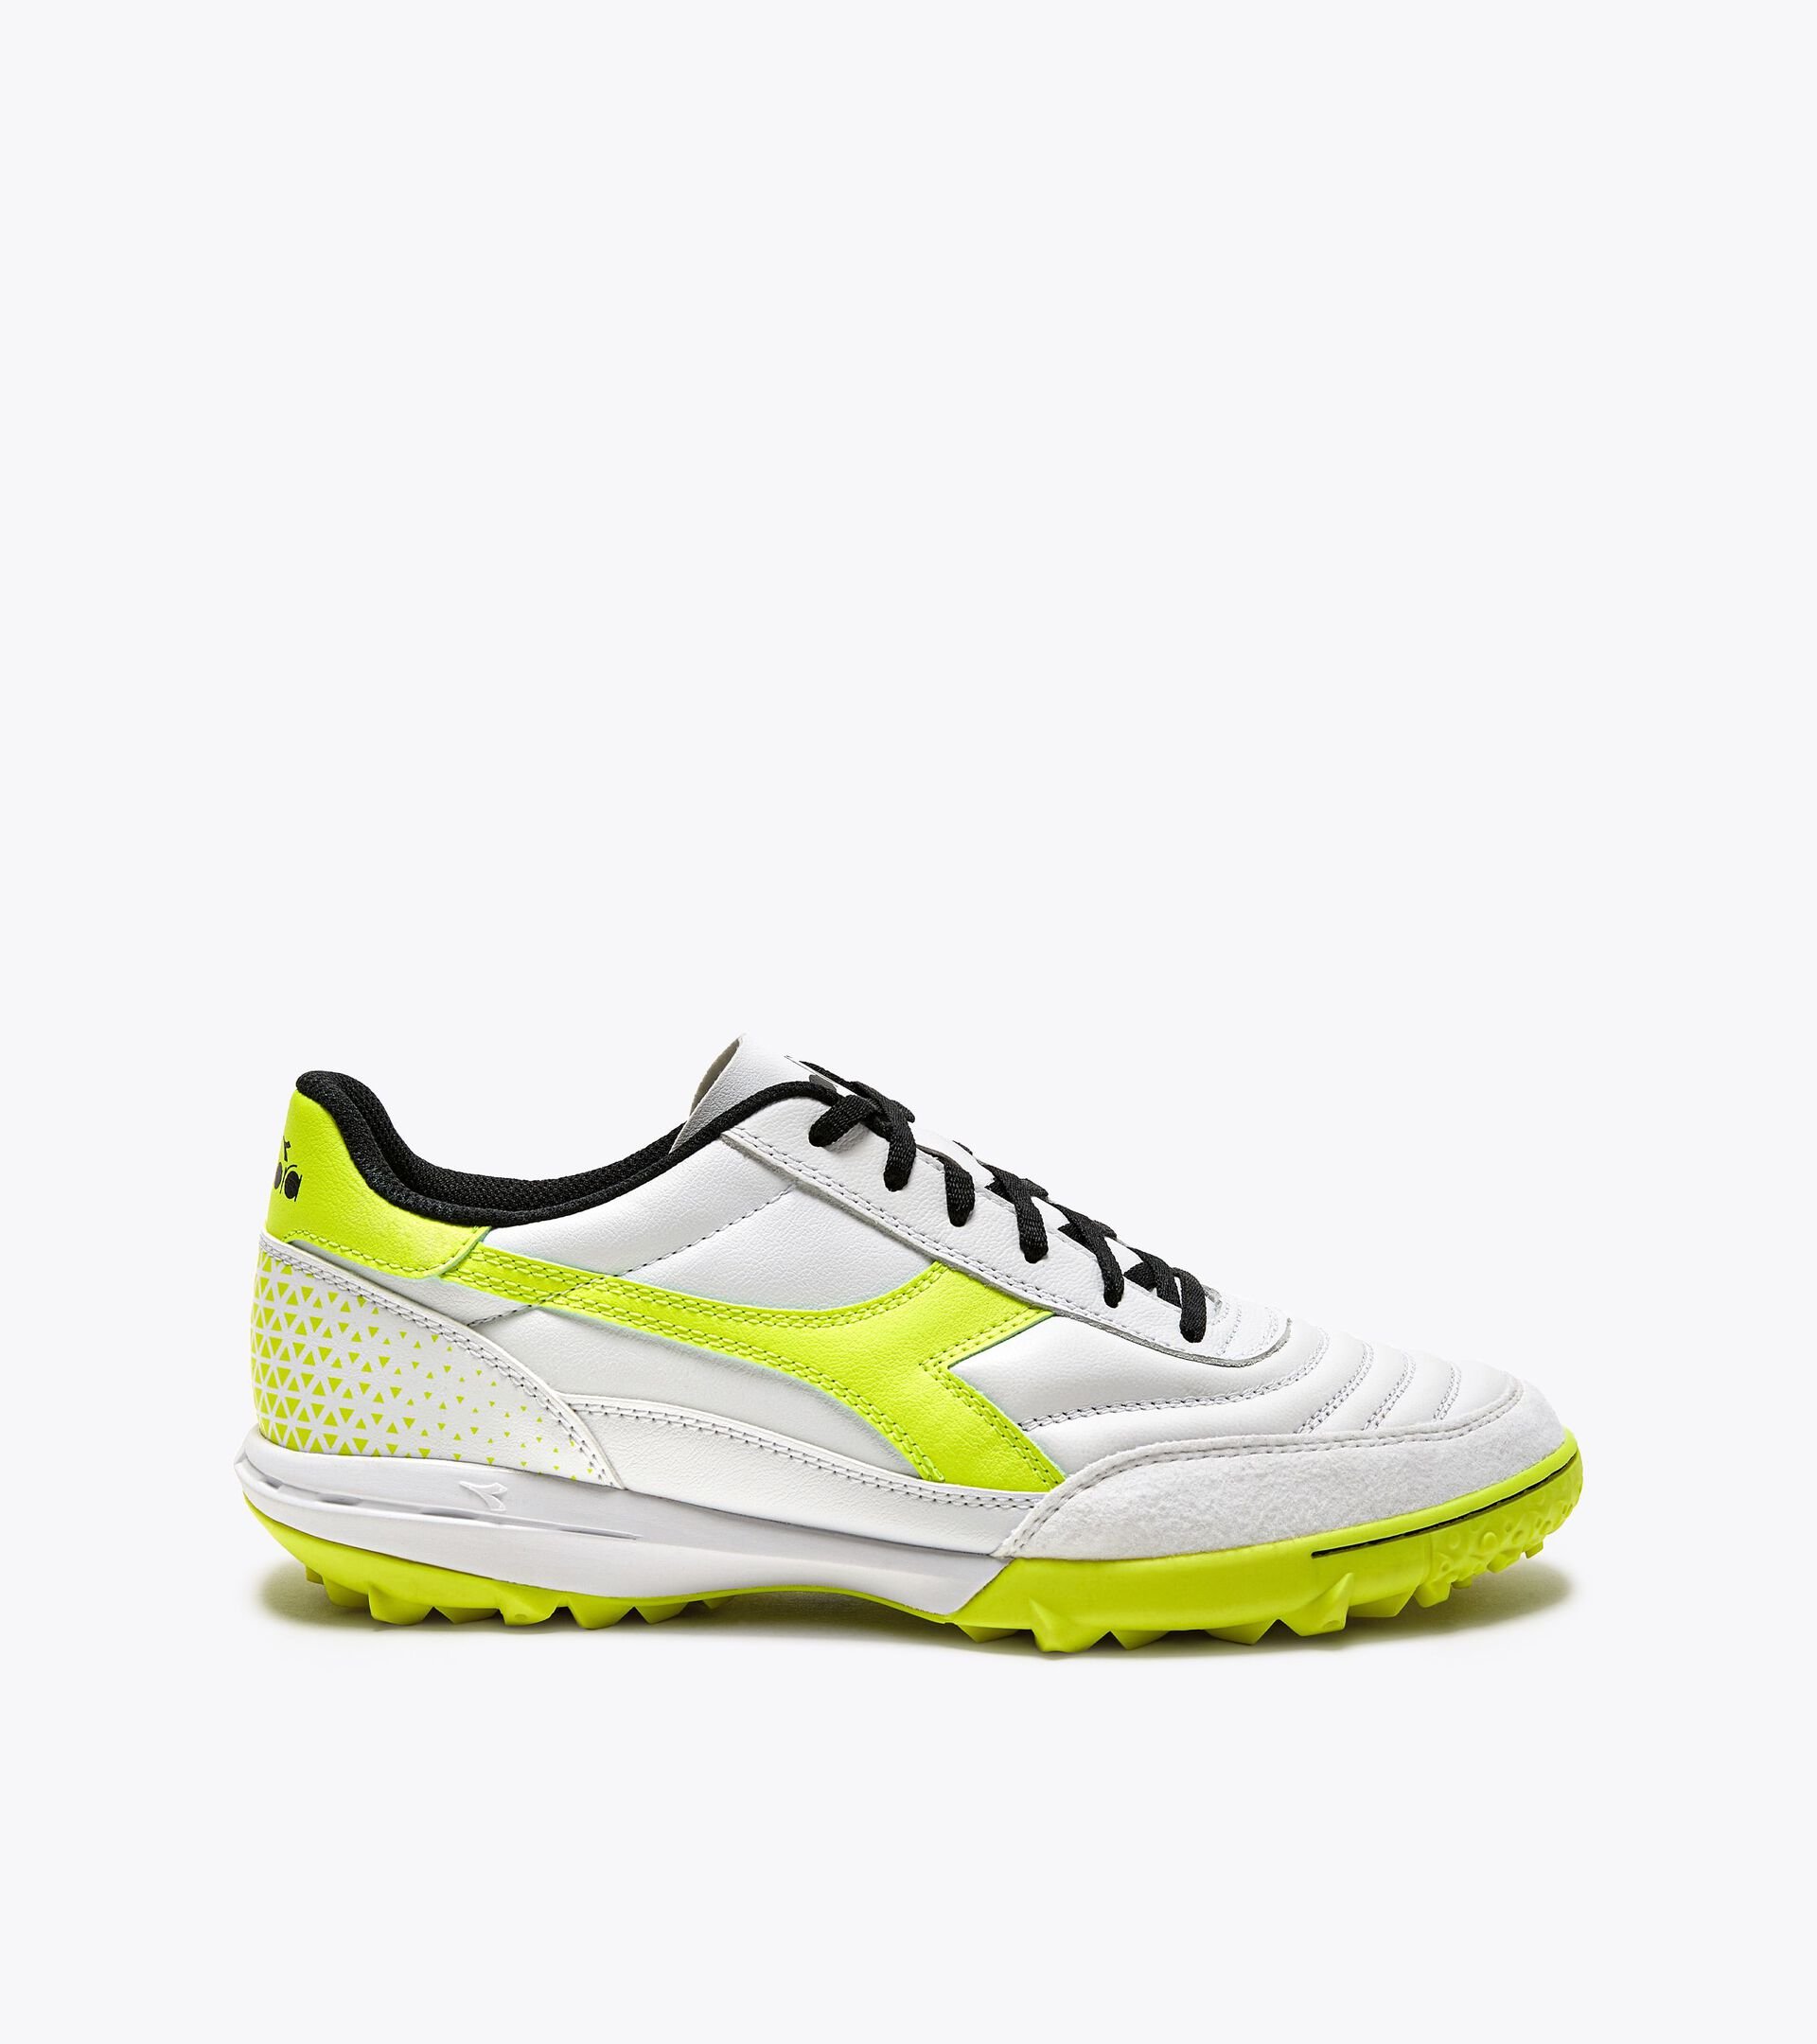 Futsal boots for synthetic grounds - Men CALCETTO GR  LT TF WHITE/YELLOW FL DD - Diadora